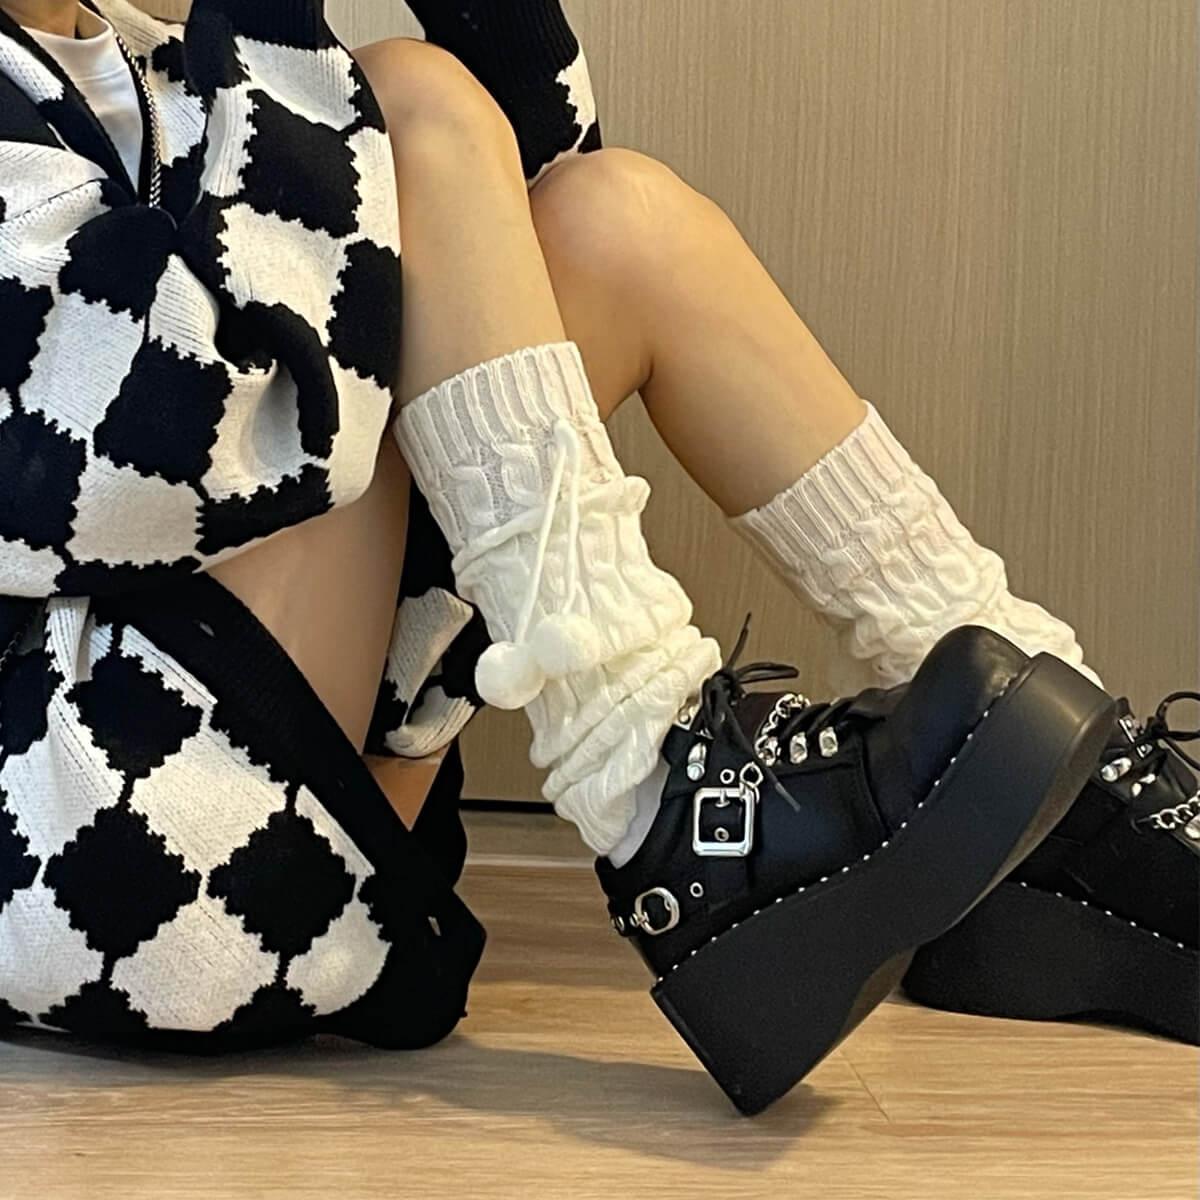 Dark Grunge Aesthetic Creeper Shoes - Aesthetic Clothes Shop